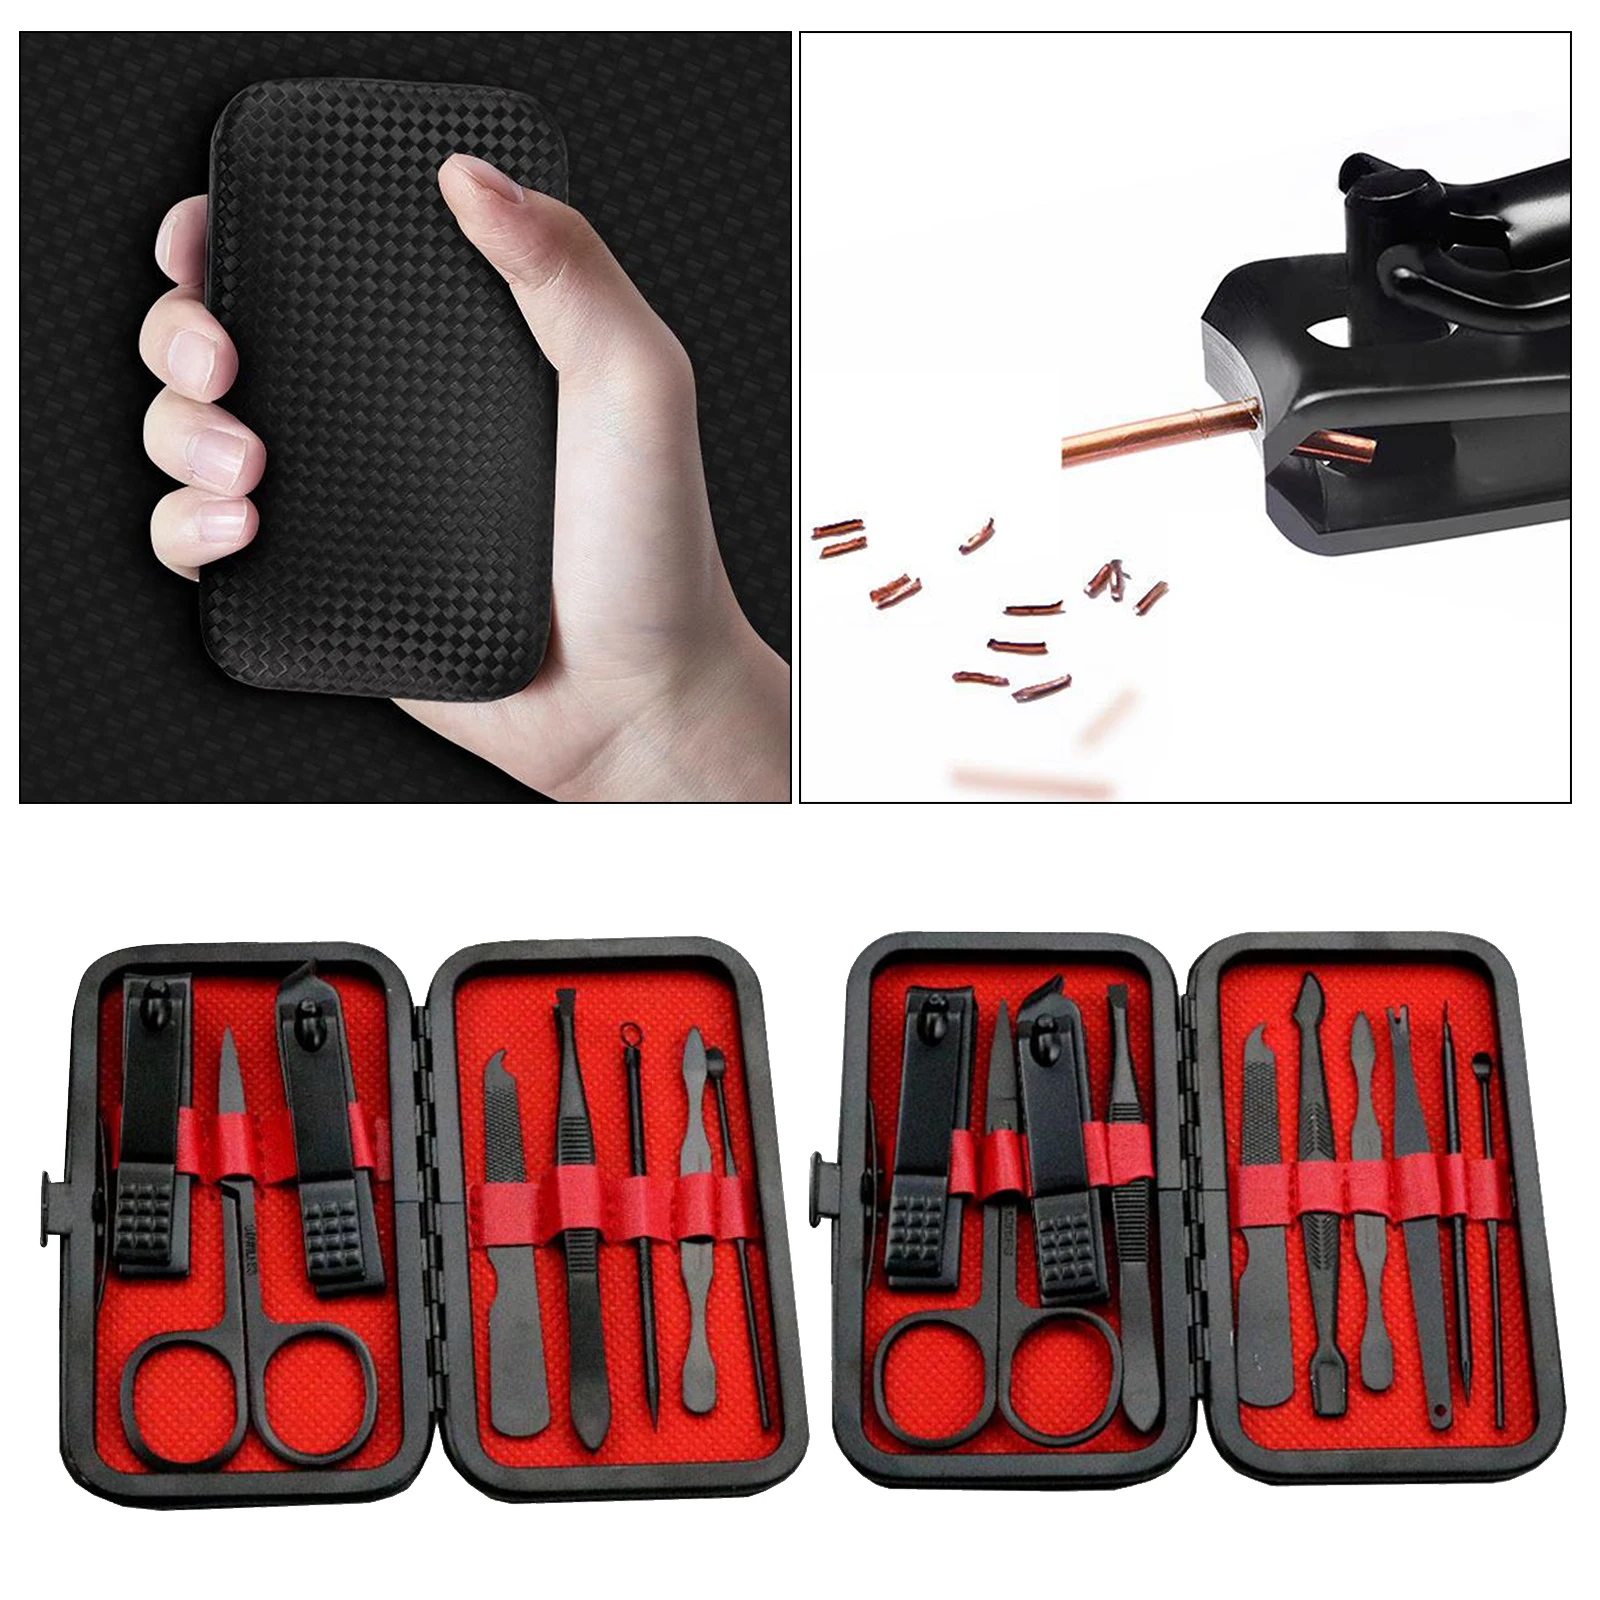 Professional Manicure Stainless Steel Pedicure Care Tool Set in a Leather Box